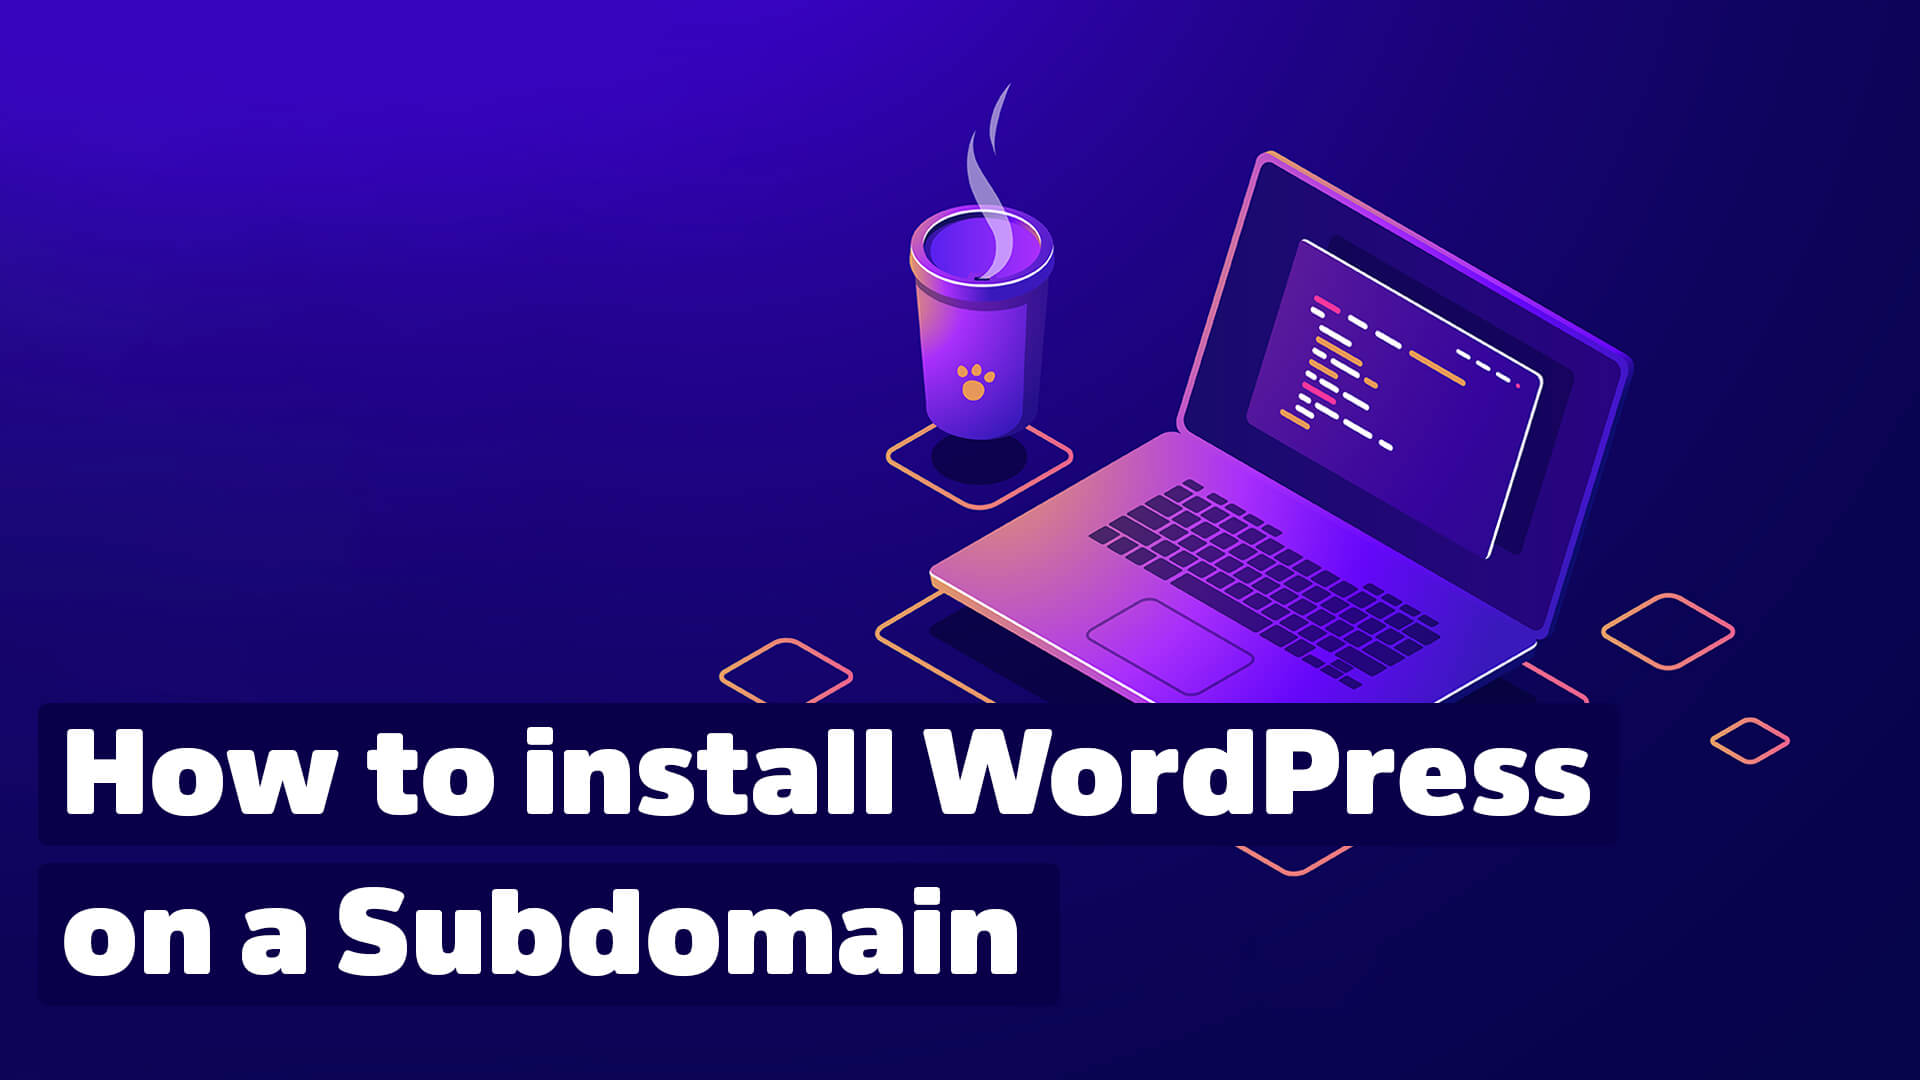 How to install WordPress on a subdomain